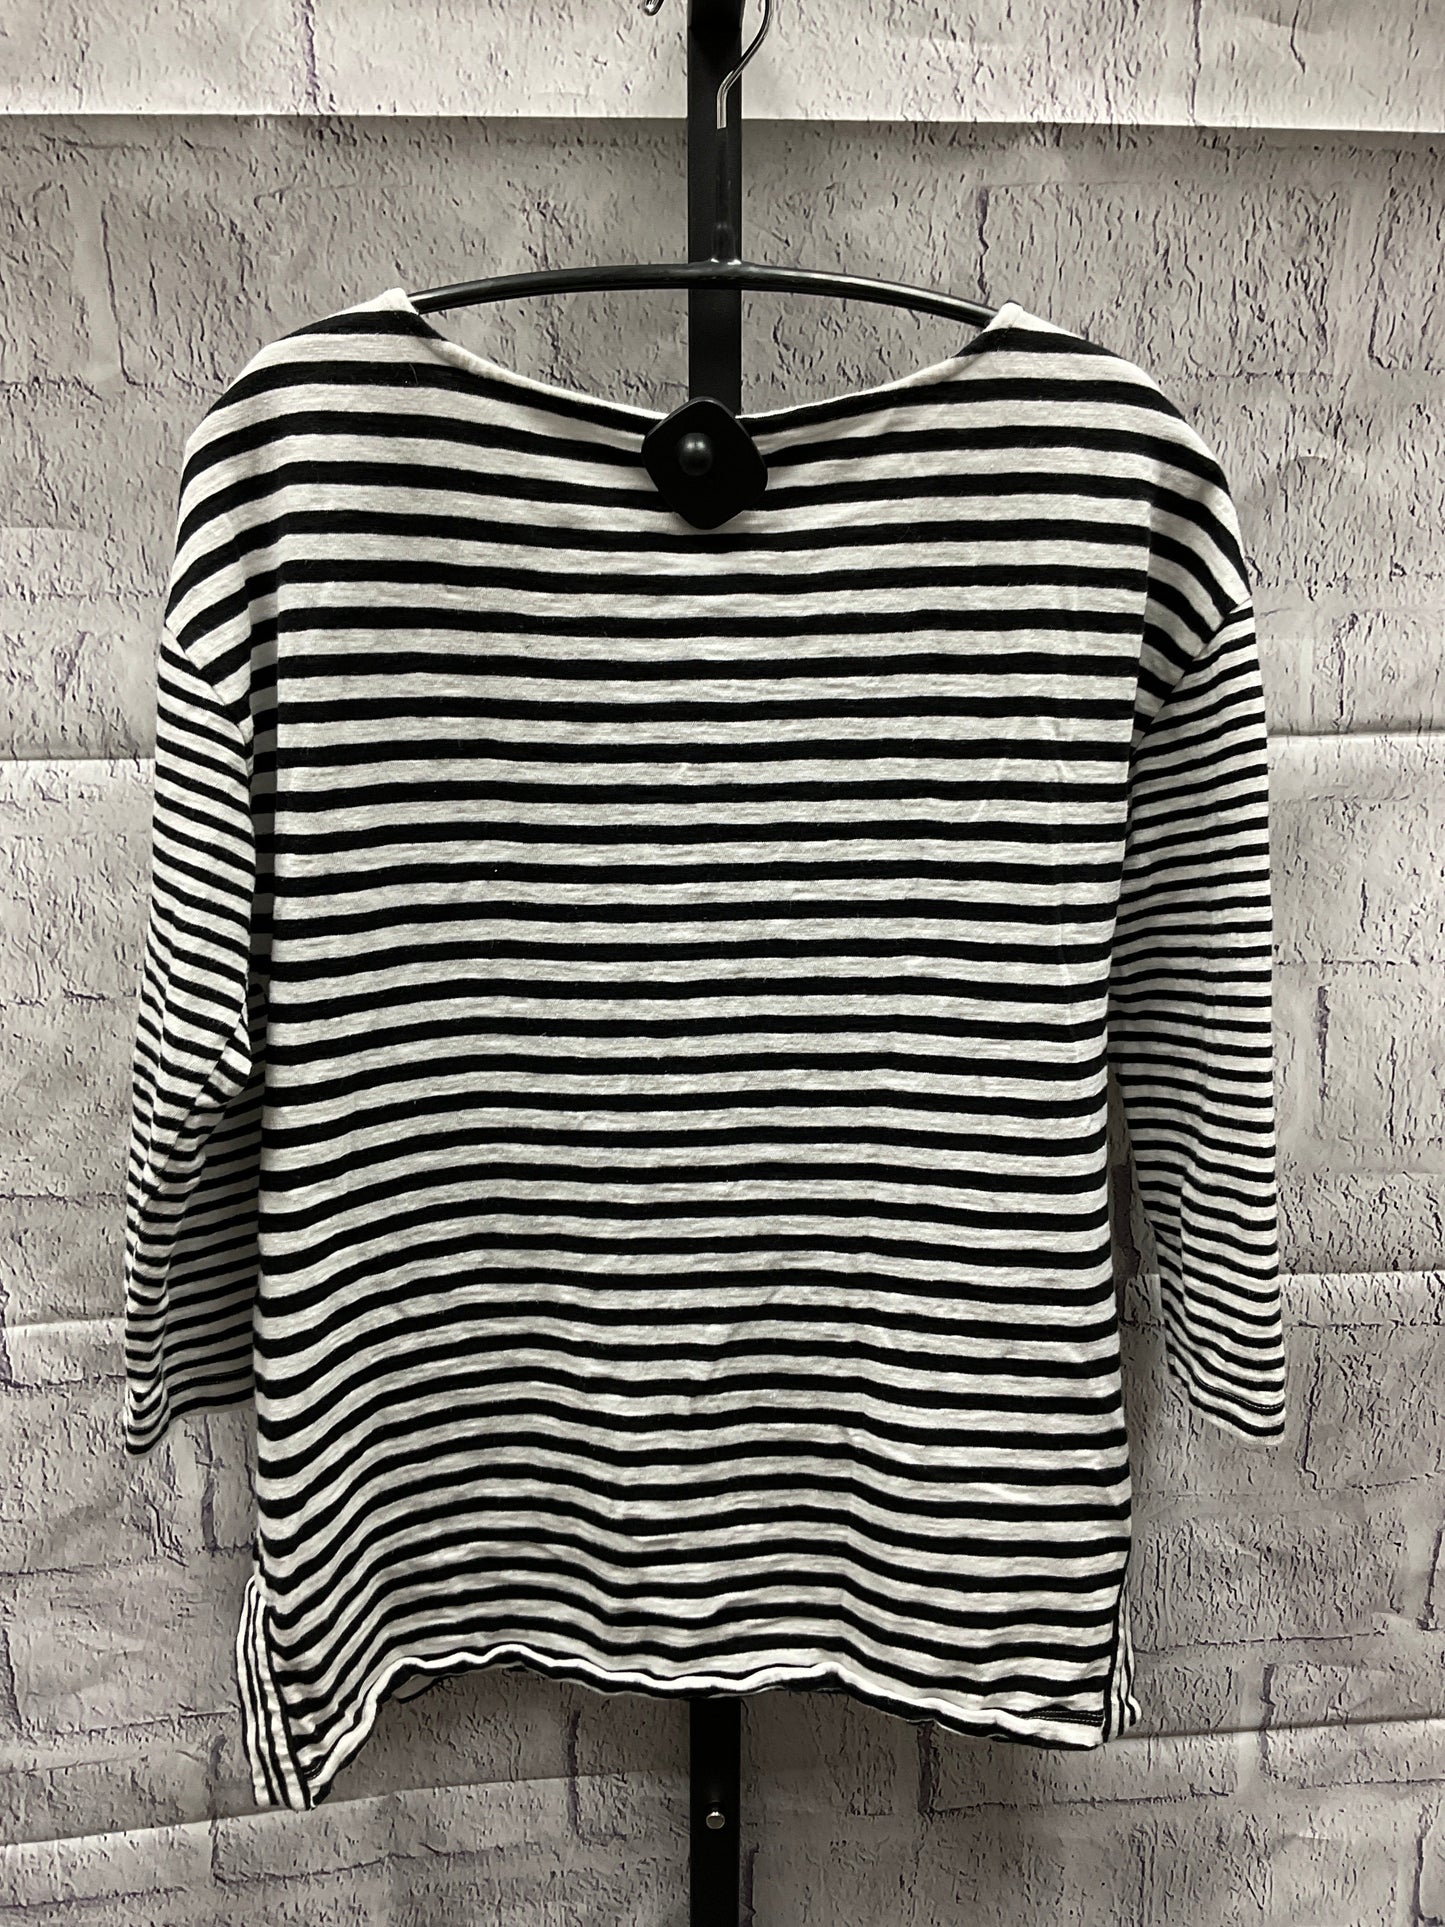 Top 3/4 Sleeve By Talbots  Size: S